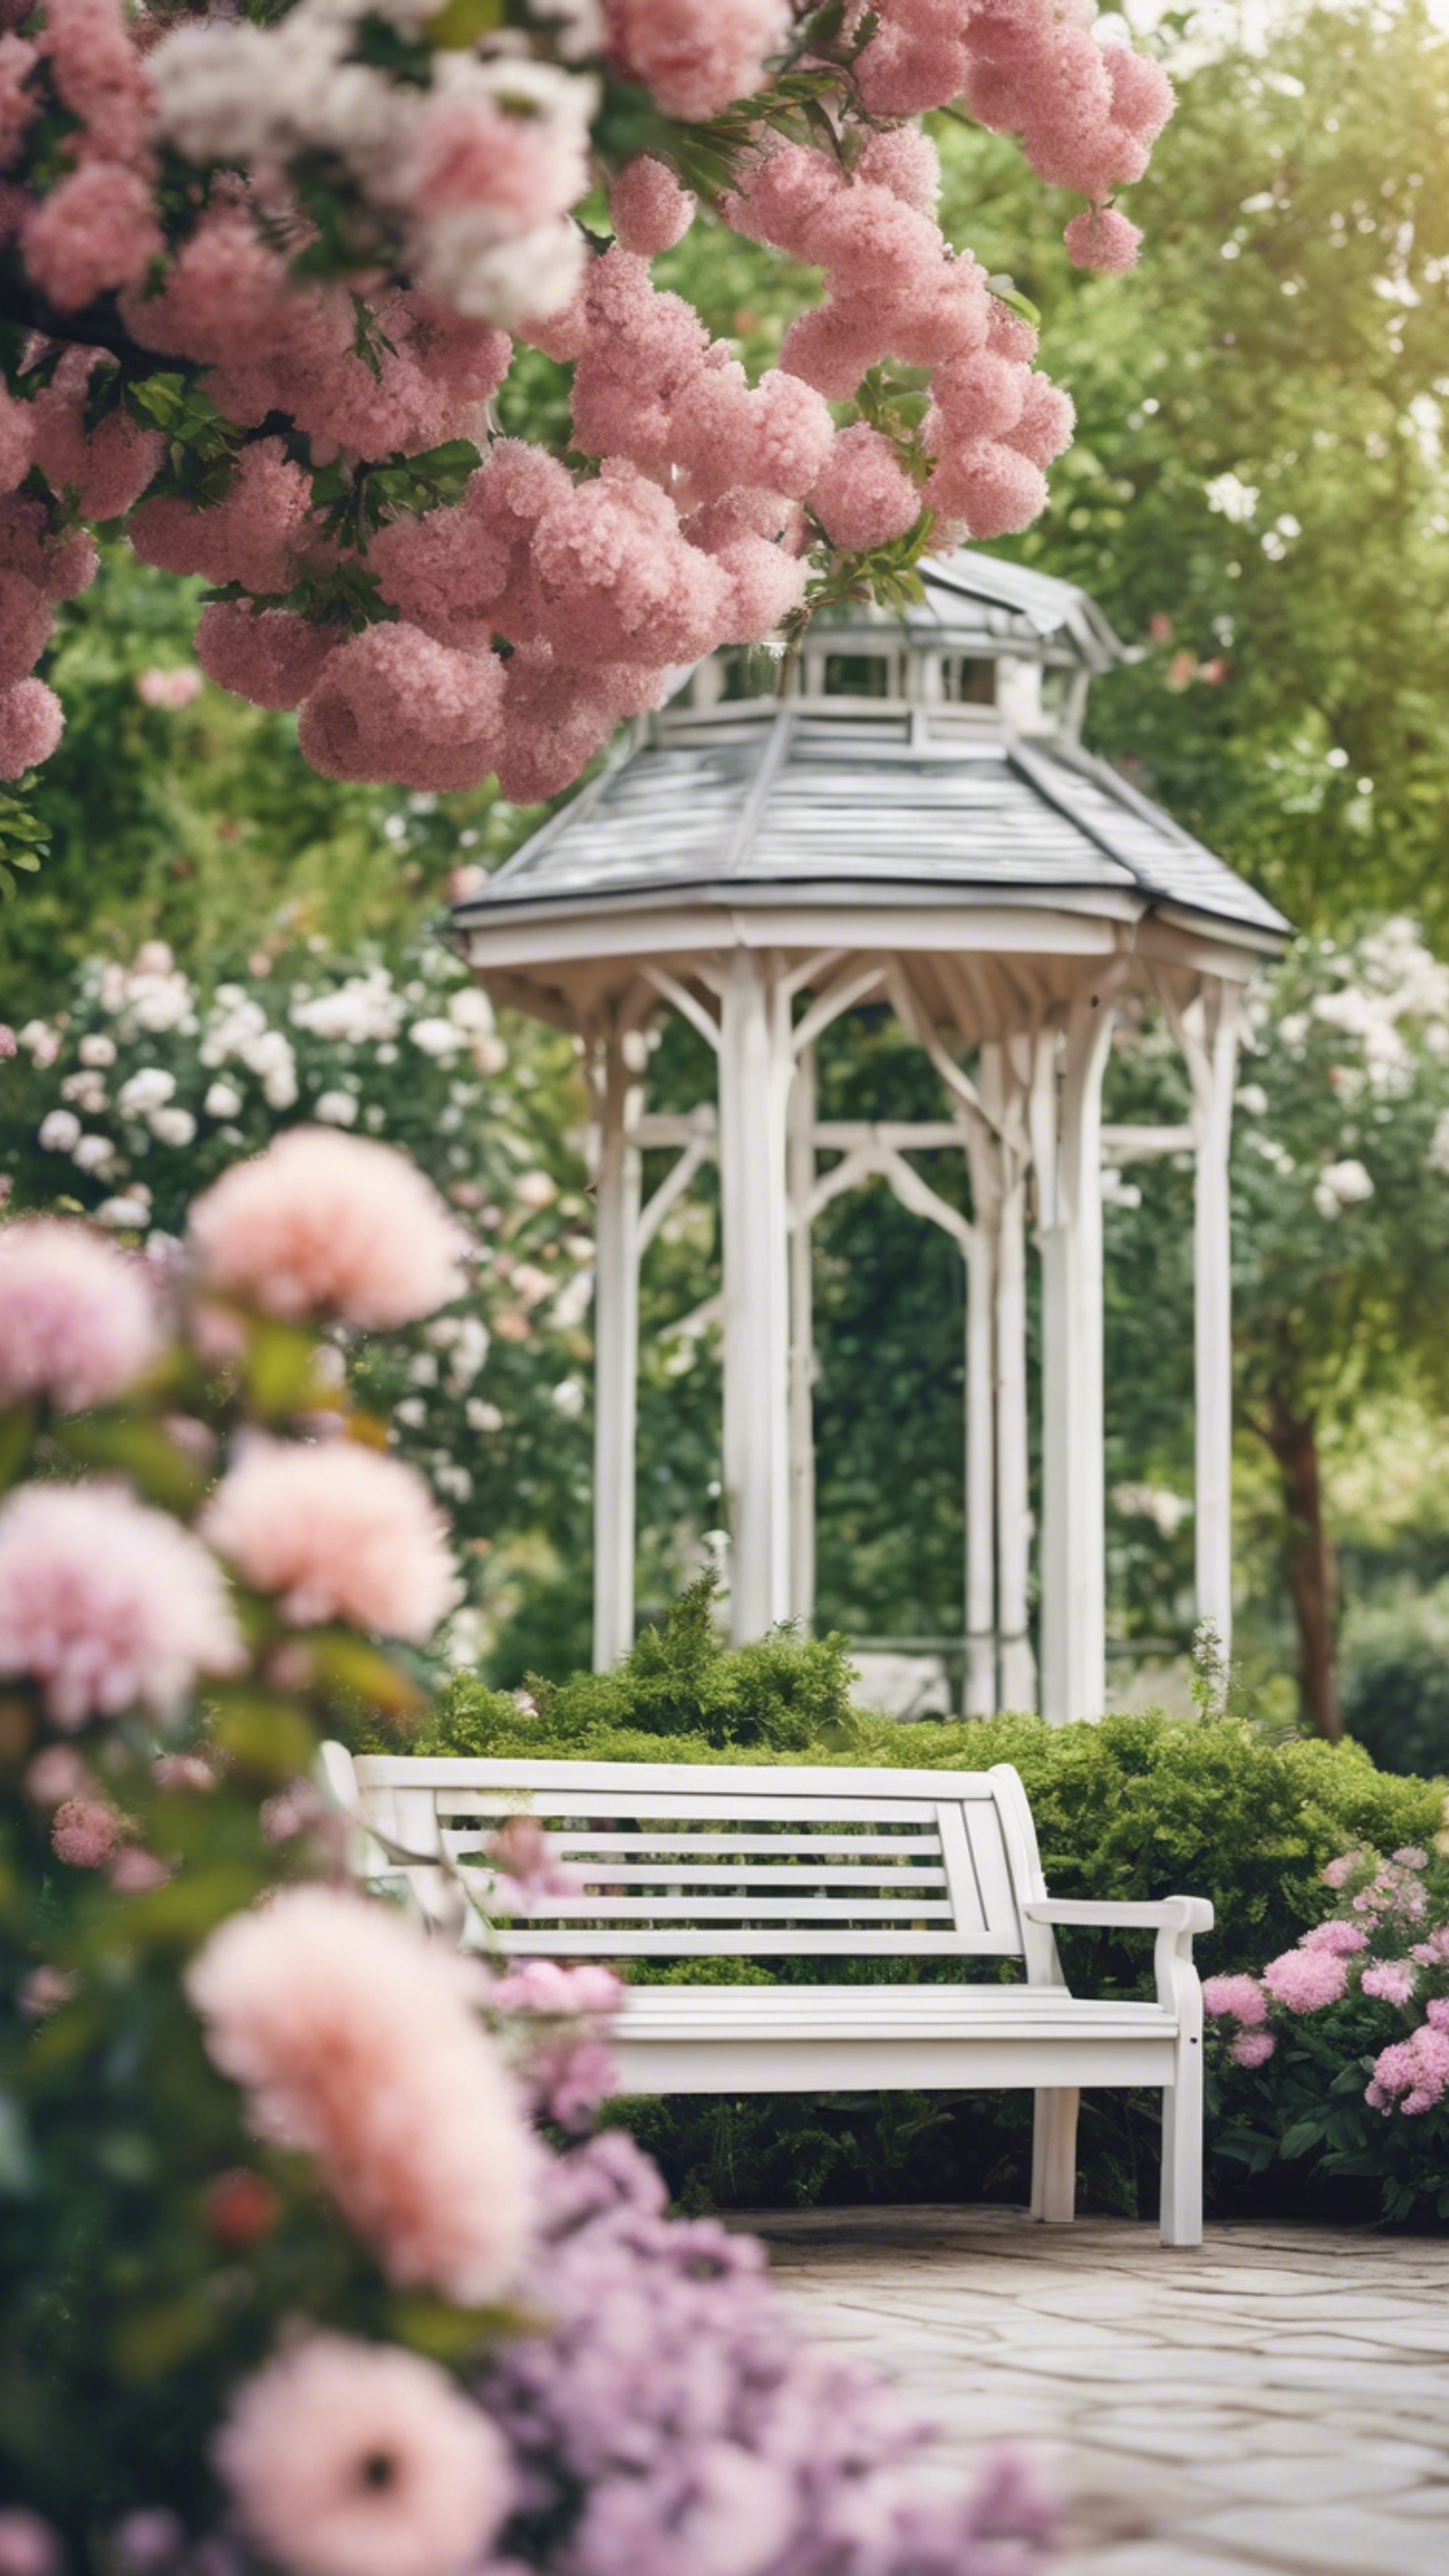 A charming summer garden with a preppy style garden bench, surrounded by flowers in full bloom under the white gazebo. Wallpaper[66d37d8478ca425cac49]